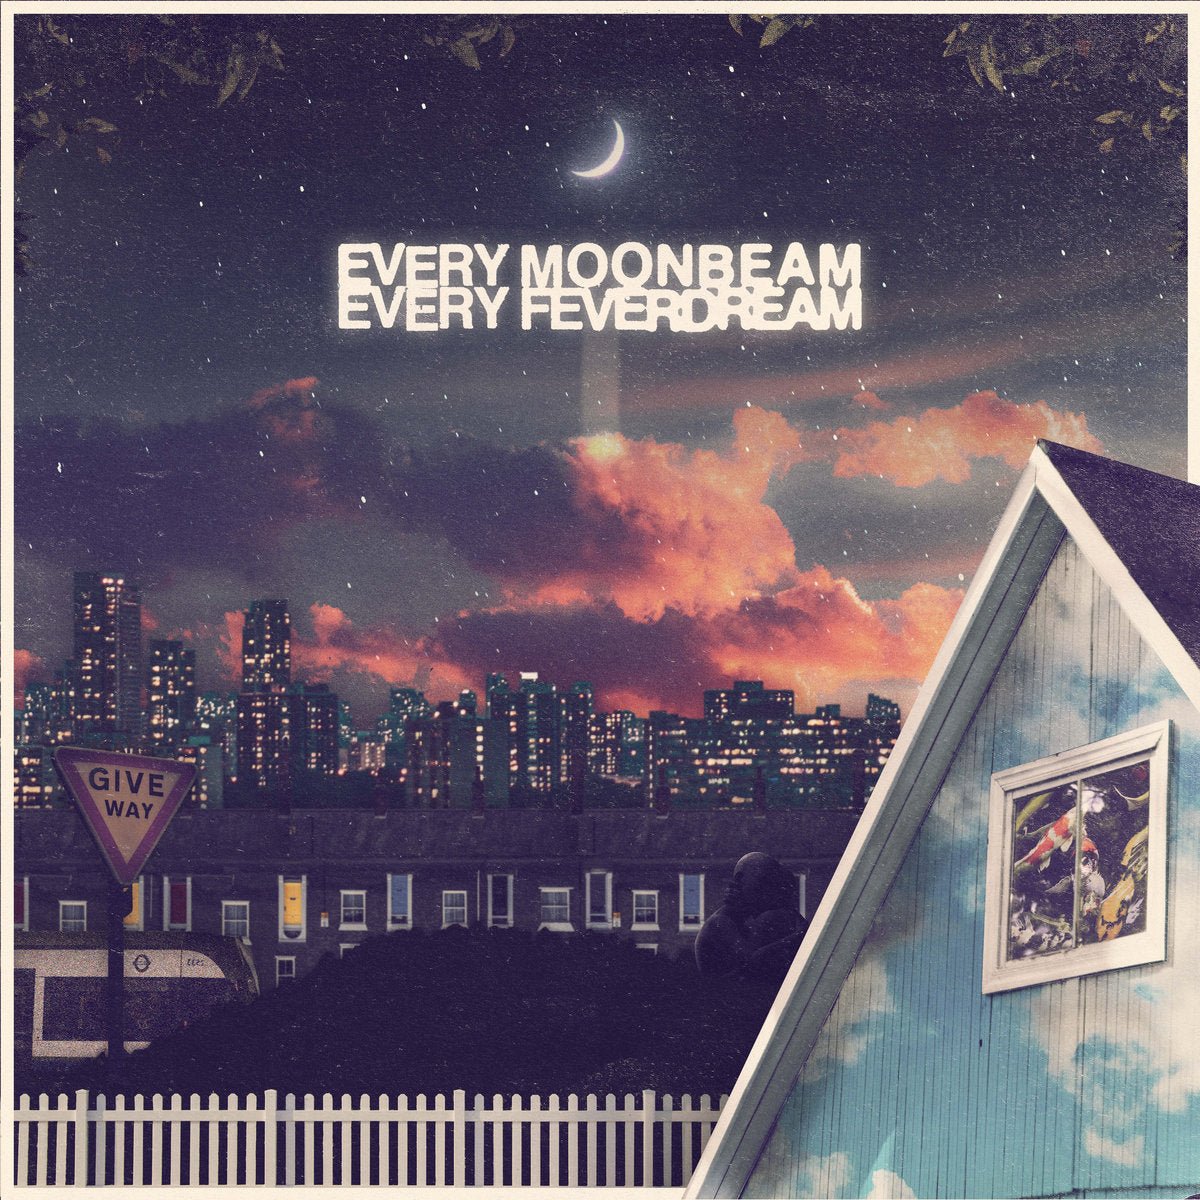 Bears In Trees - Every Moonbeam Every Feverdream LP - Vinyl - Counter Intuitive